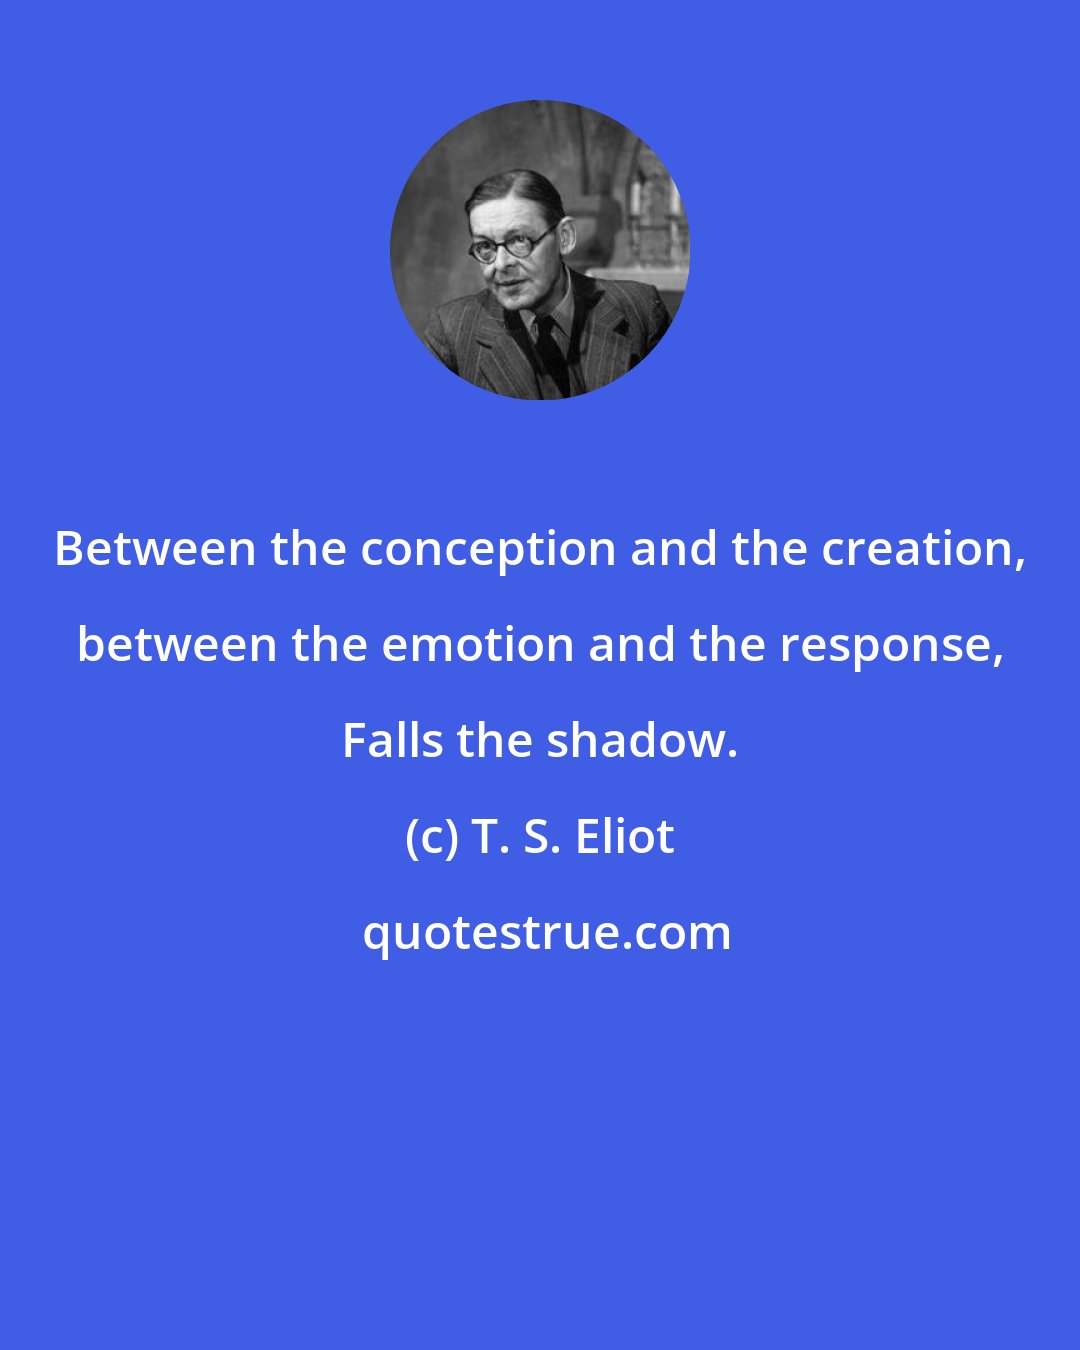 T. S. Eliot: Between the conception and the creation, between the emotion and the response, Falls the shadow.